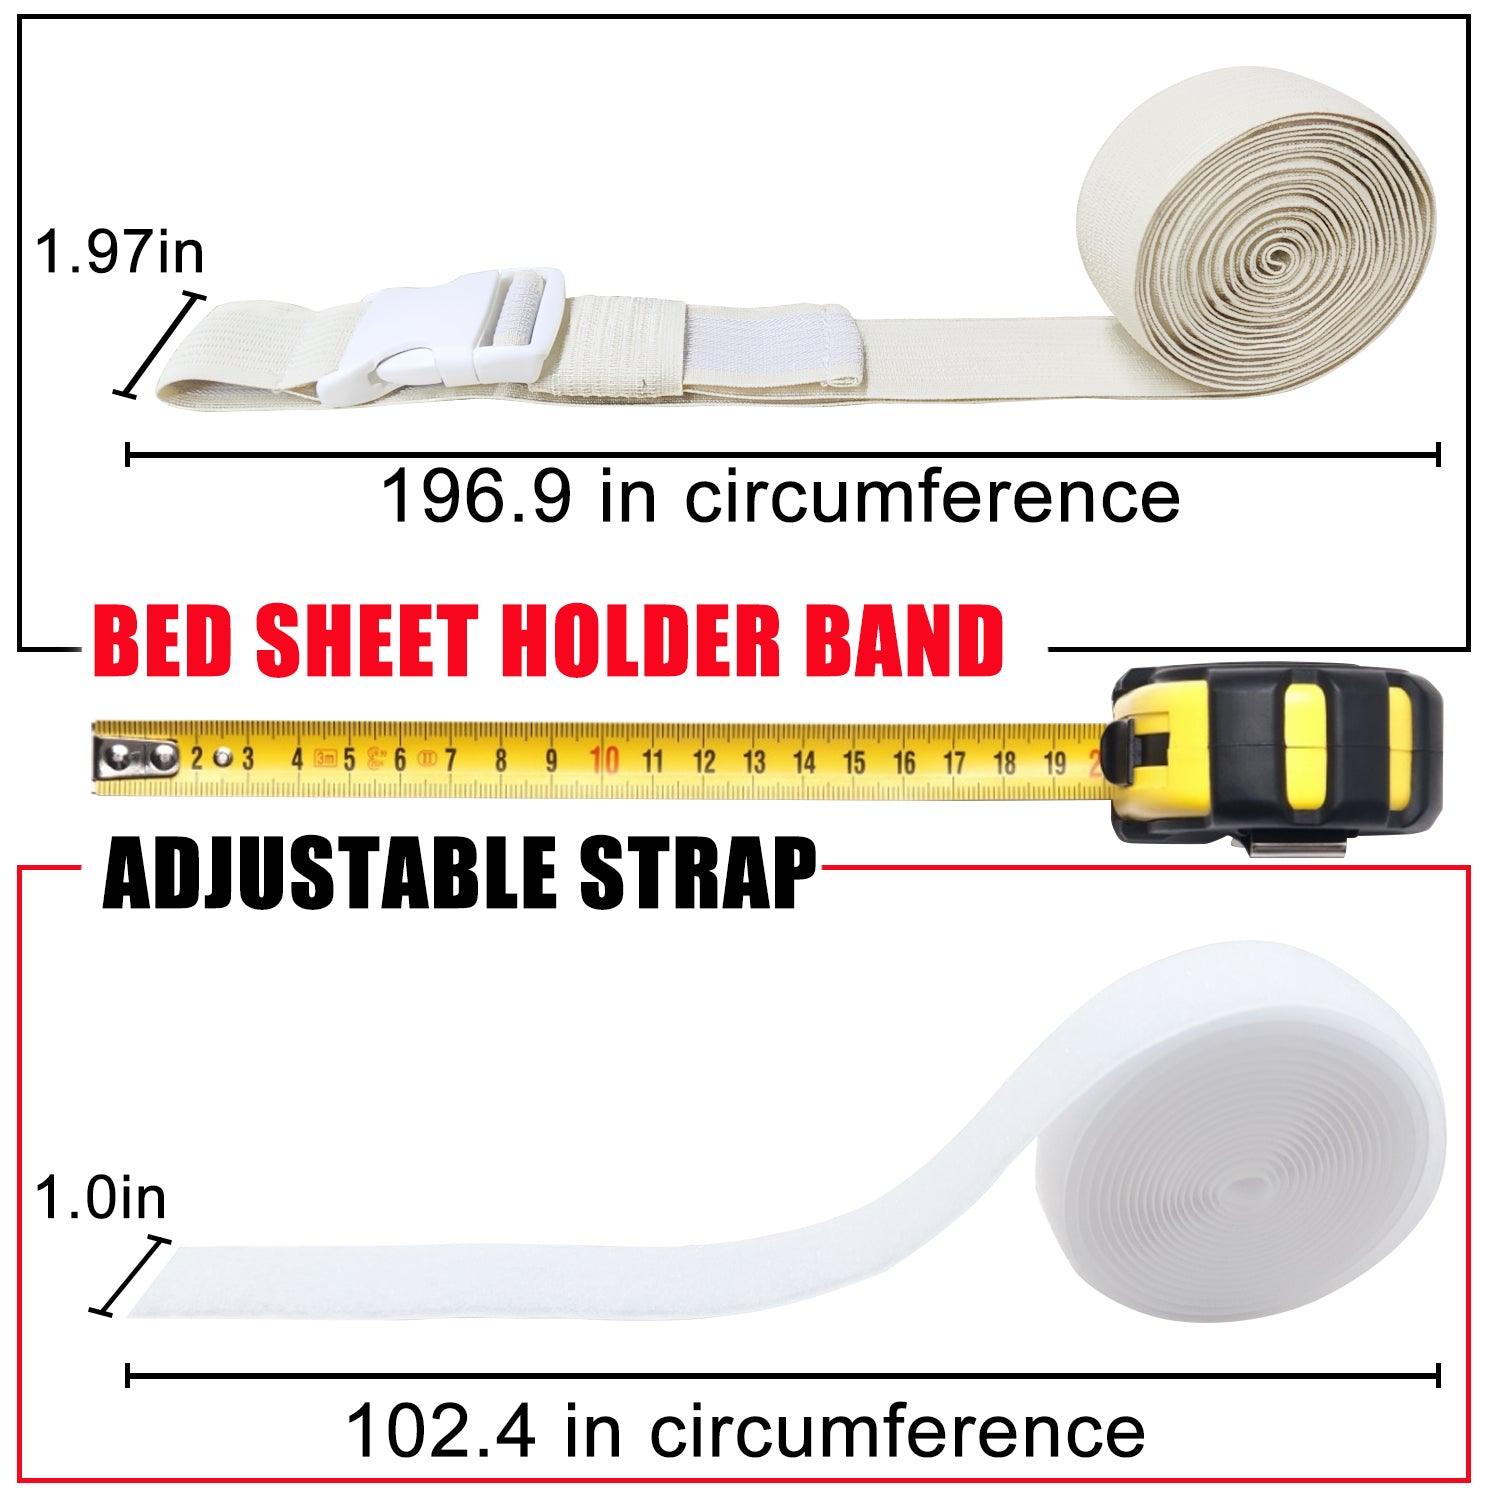 Shop Now - The Most Effective Bed Sheet Strap - Realyou Store